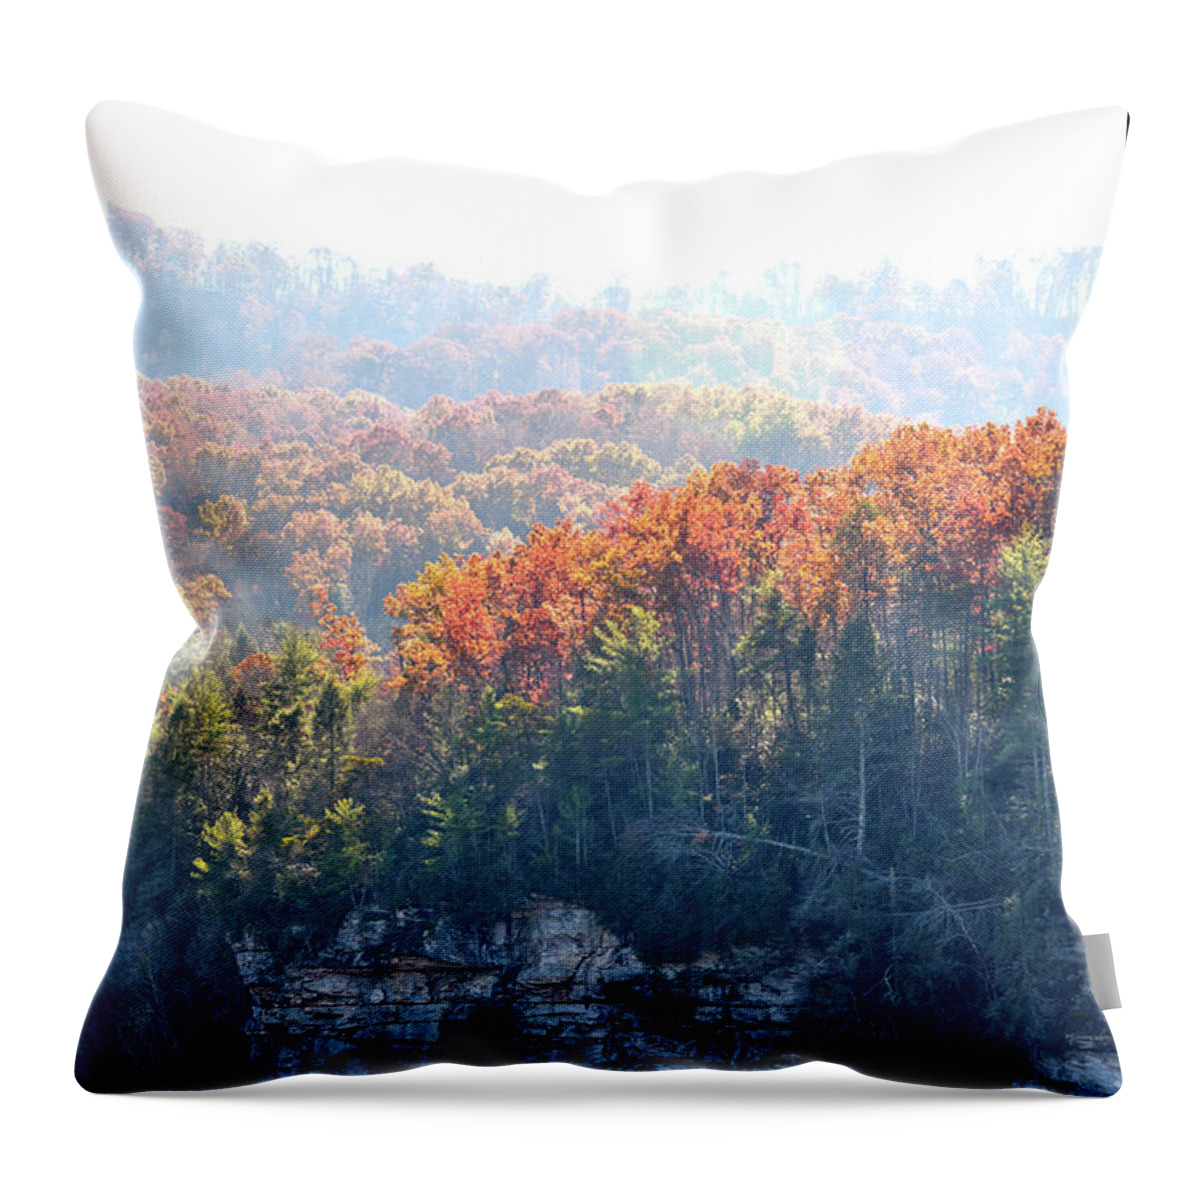 Nature Throw Pillow featuring the photograph Point Trail At Obed 5 by Phil Perkins